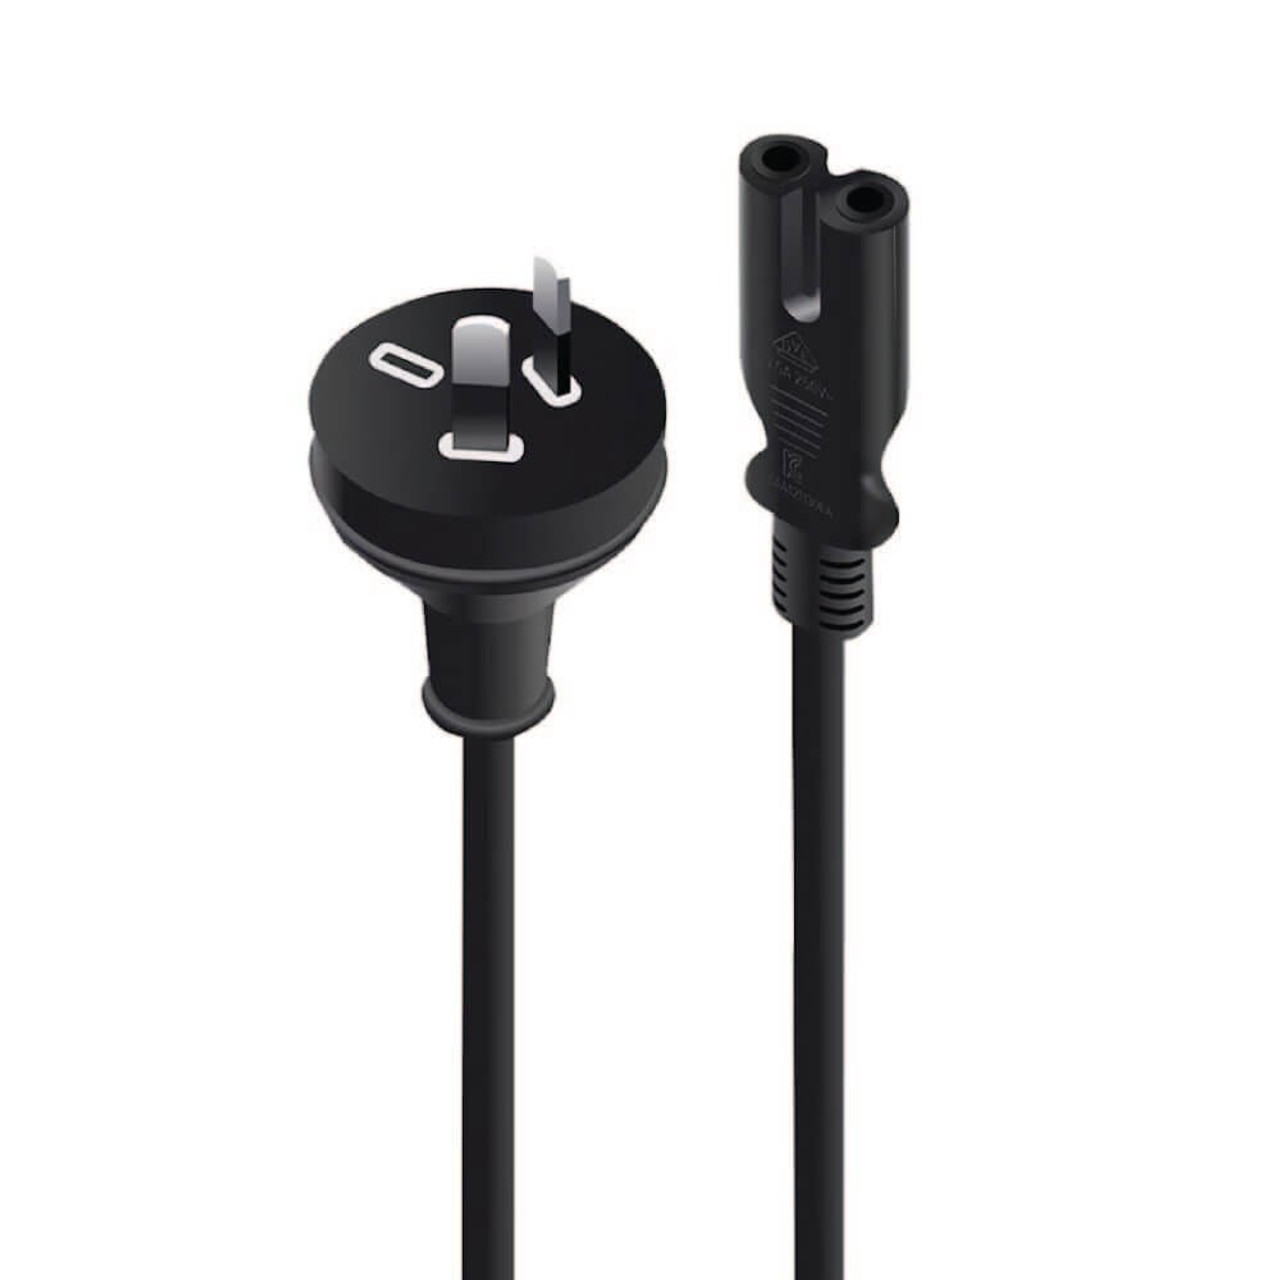 2m UK 3 Pin Plug To IEC C13 Mains Power Cable, Black - from LINDY UK